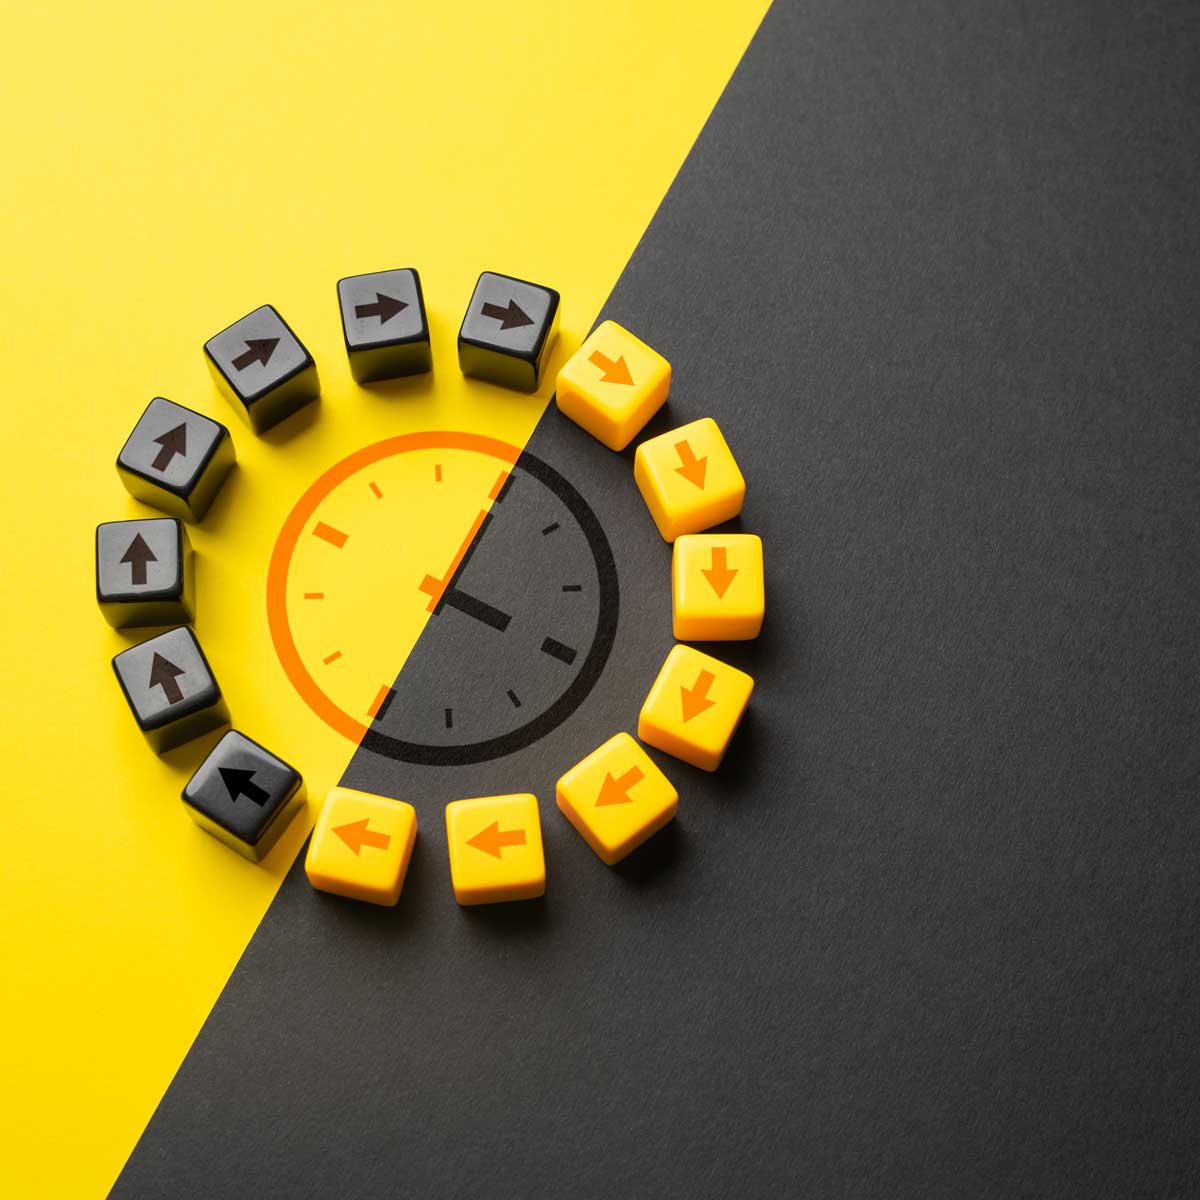 image depicting cyclical changes. clock with arrows pointing clockwise in a circle on a black and yellow background